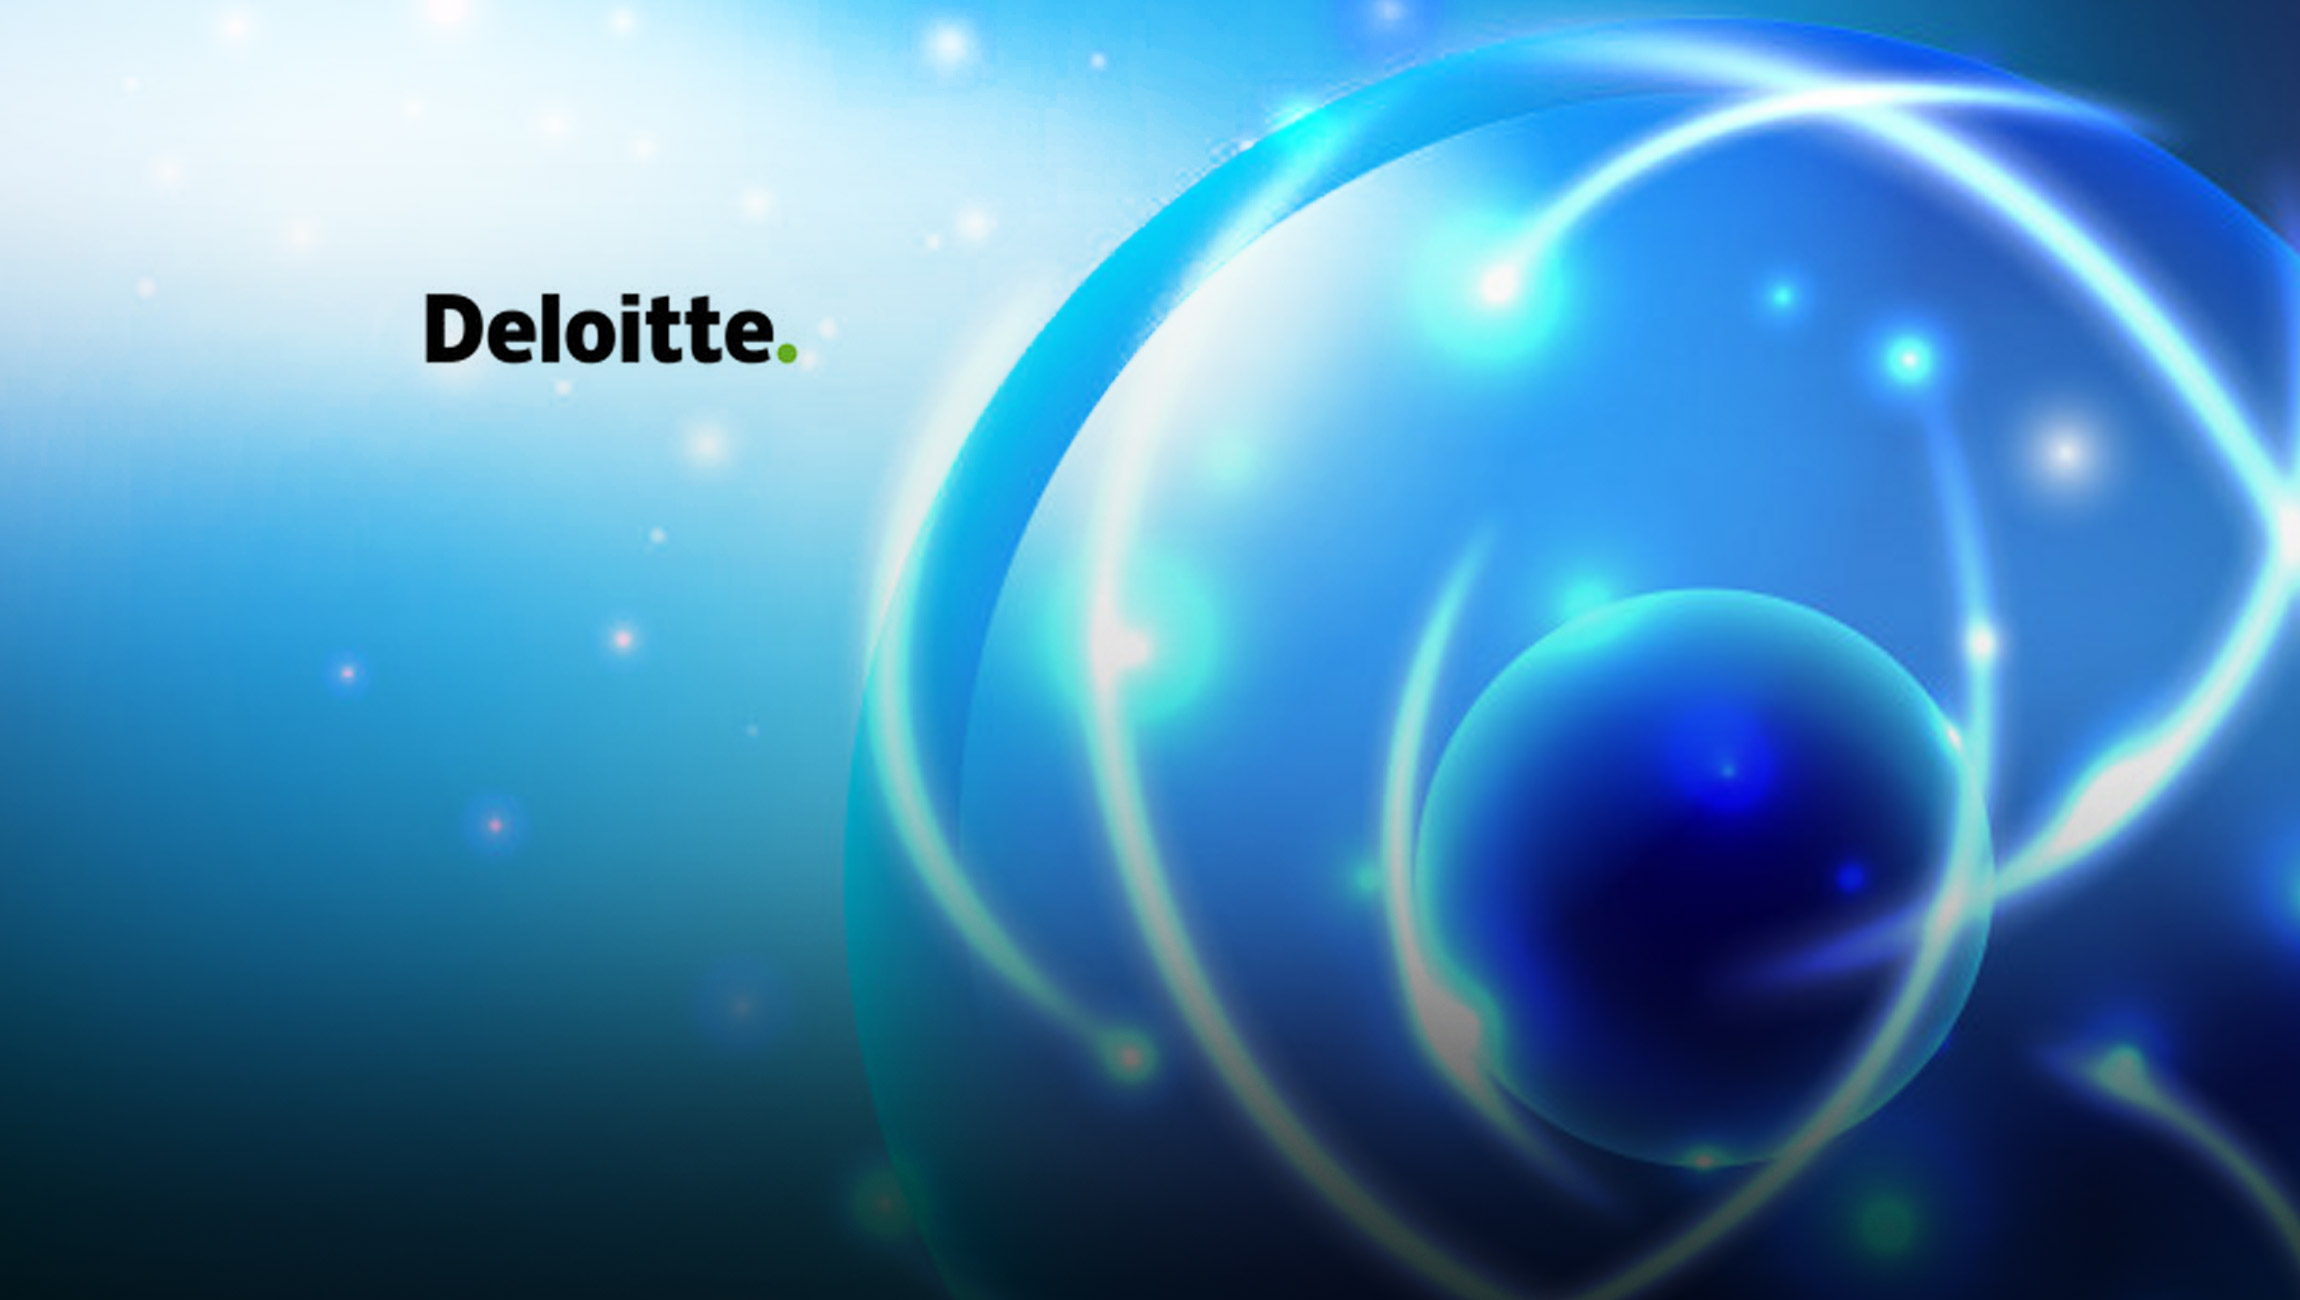 Deloitte Launches Strategic Collaboration with AWS Professional Services on Cloud Migration and Modernization for Enterprise and Public Sector Customers